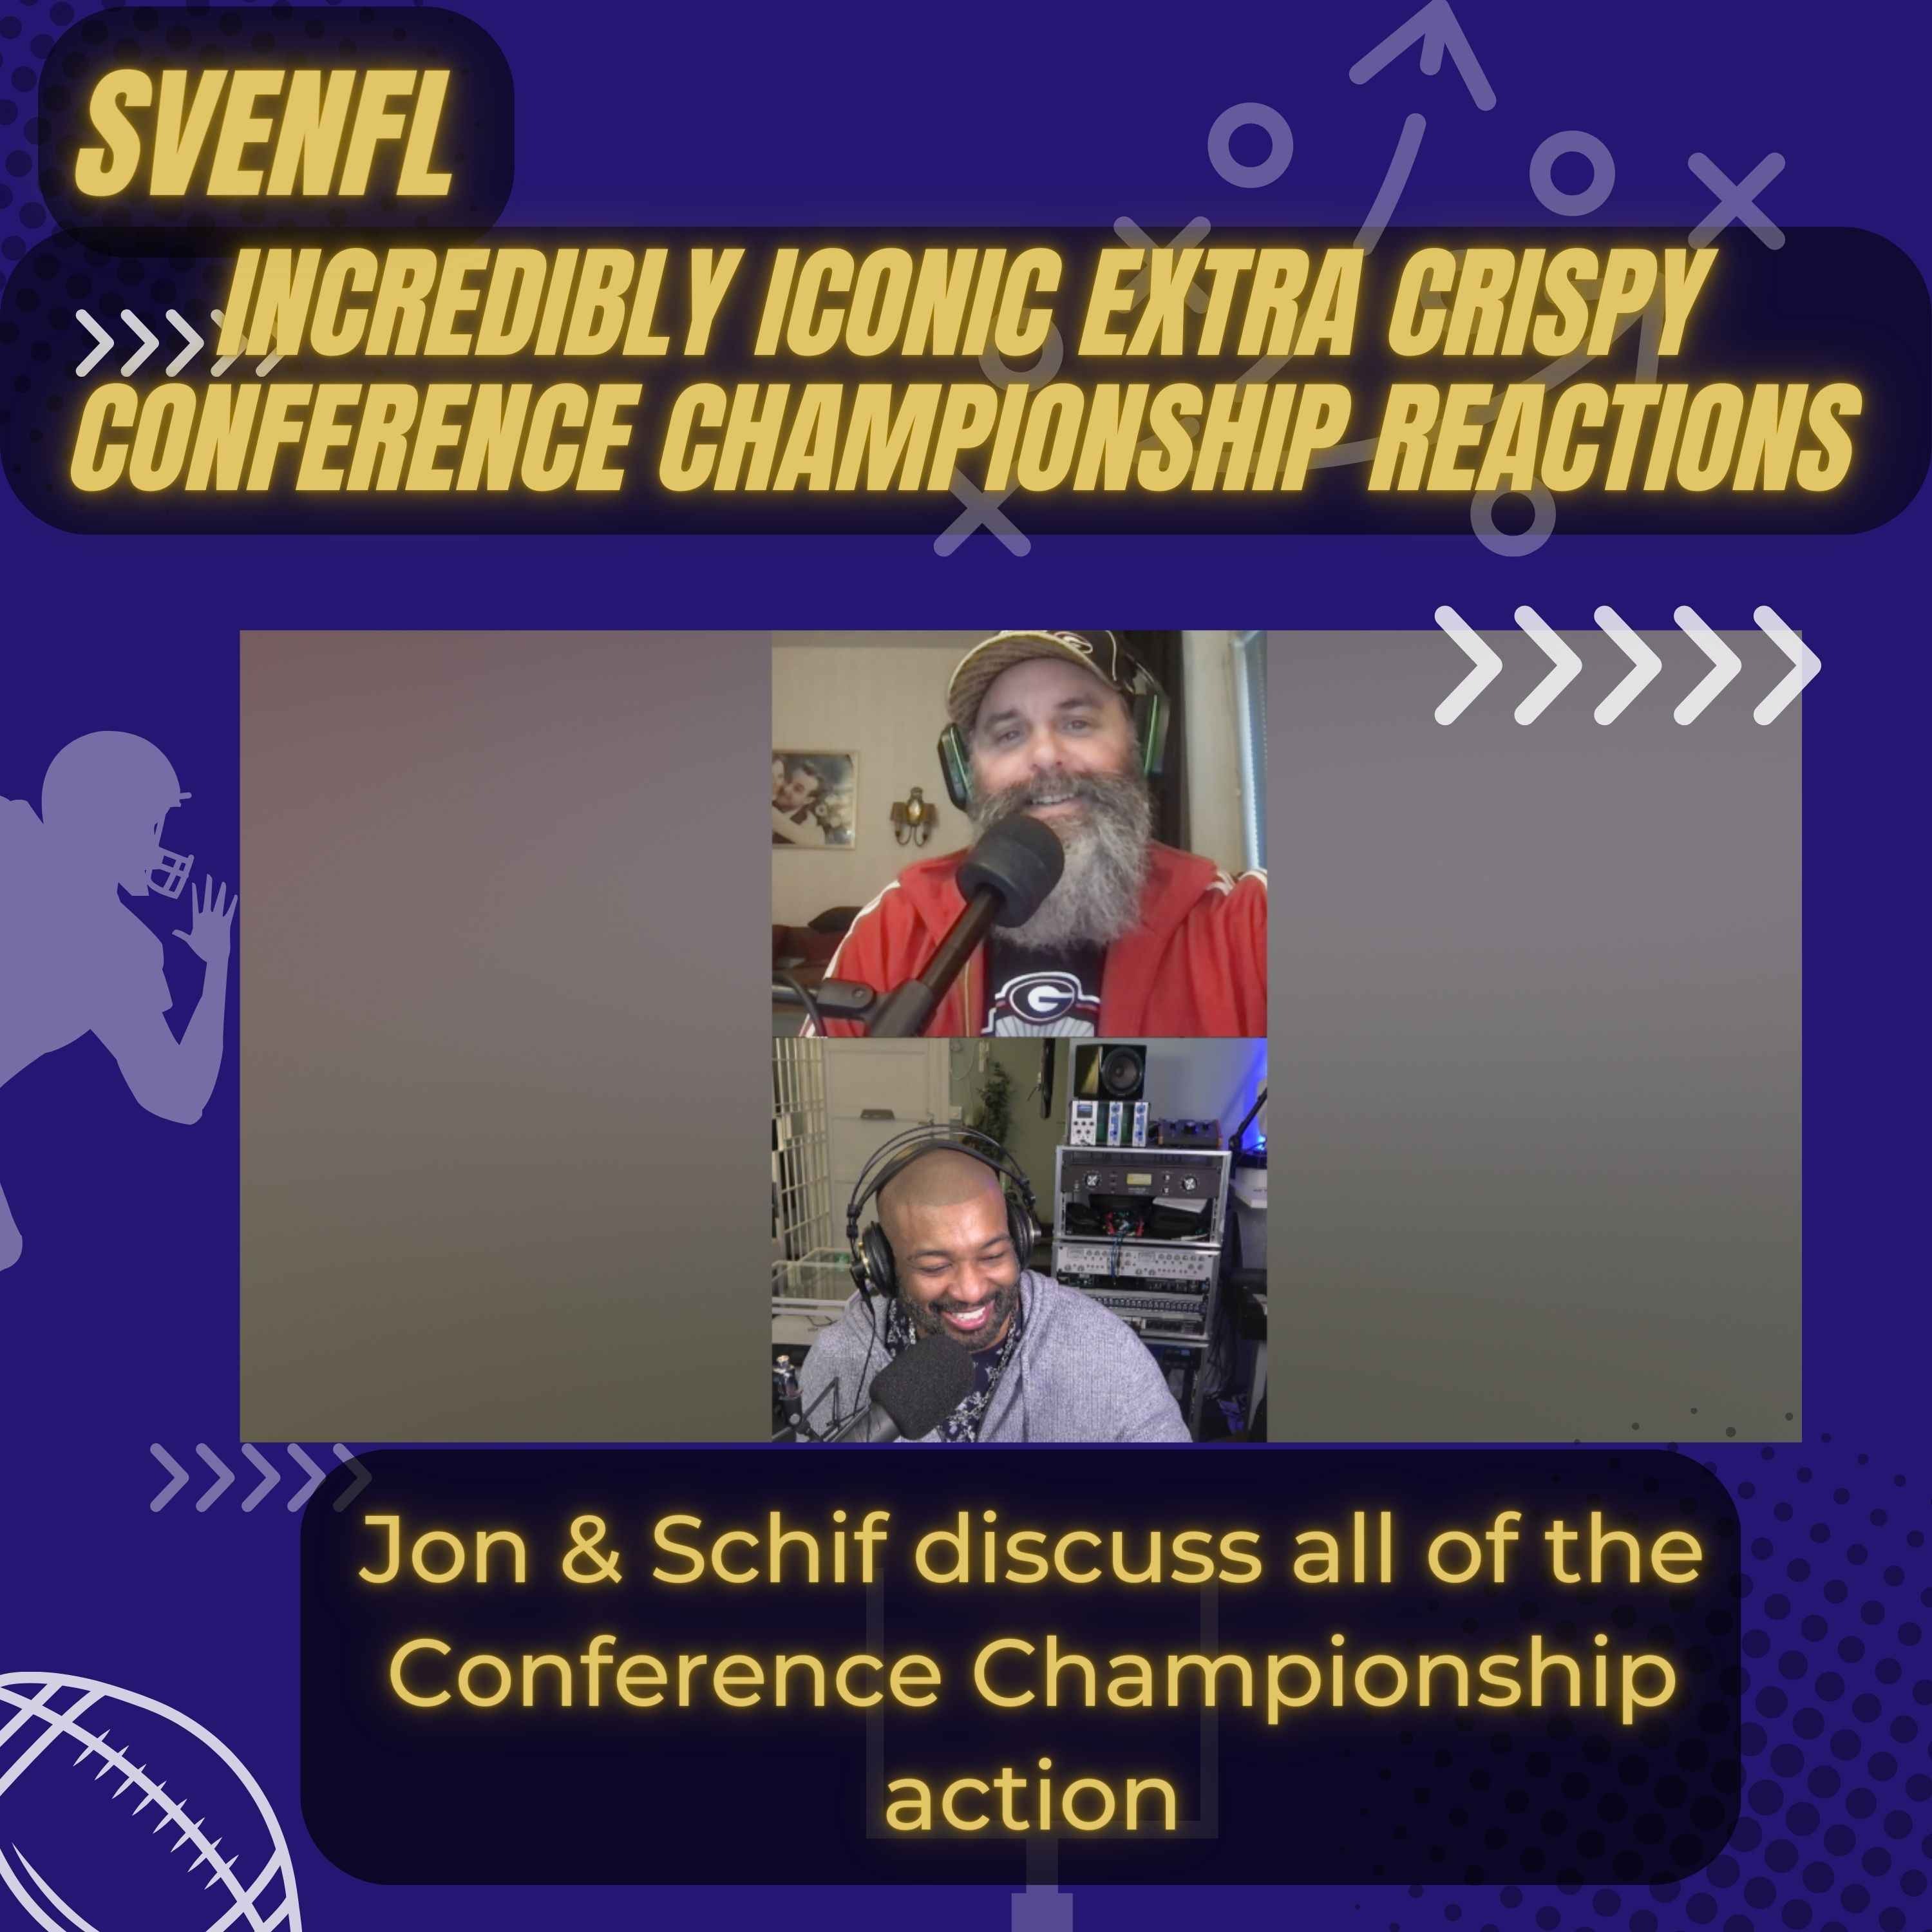 SveNFL 2023 Incredibly Iconic Extra Crispy Conference Championship Game Reactions